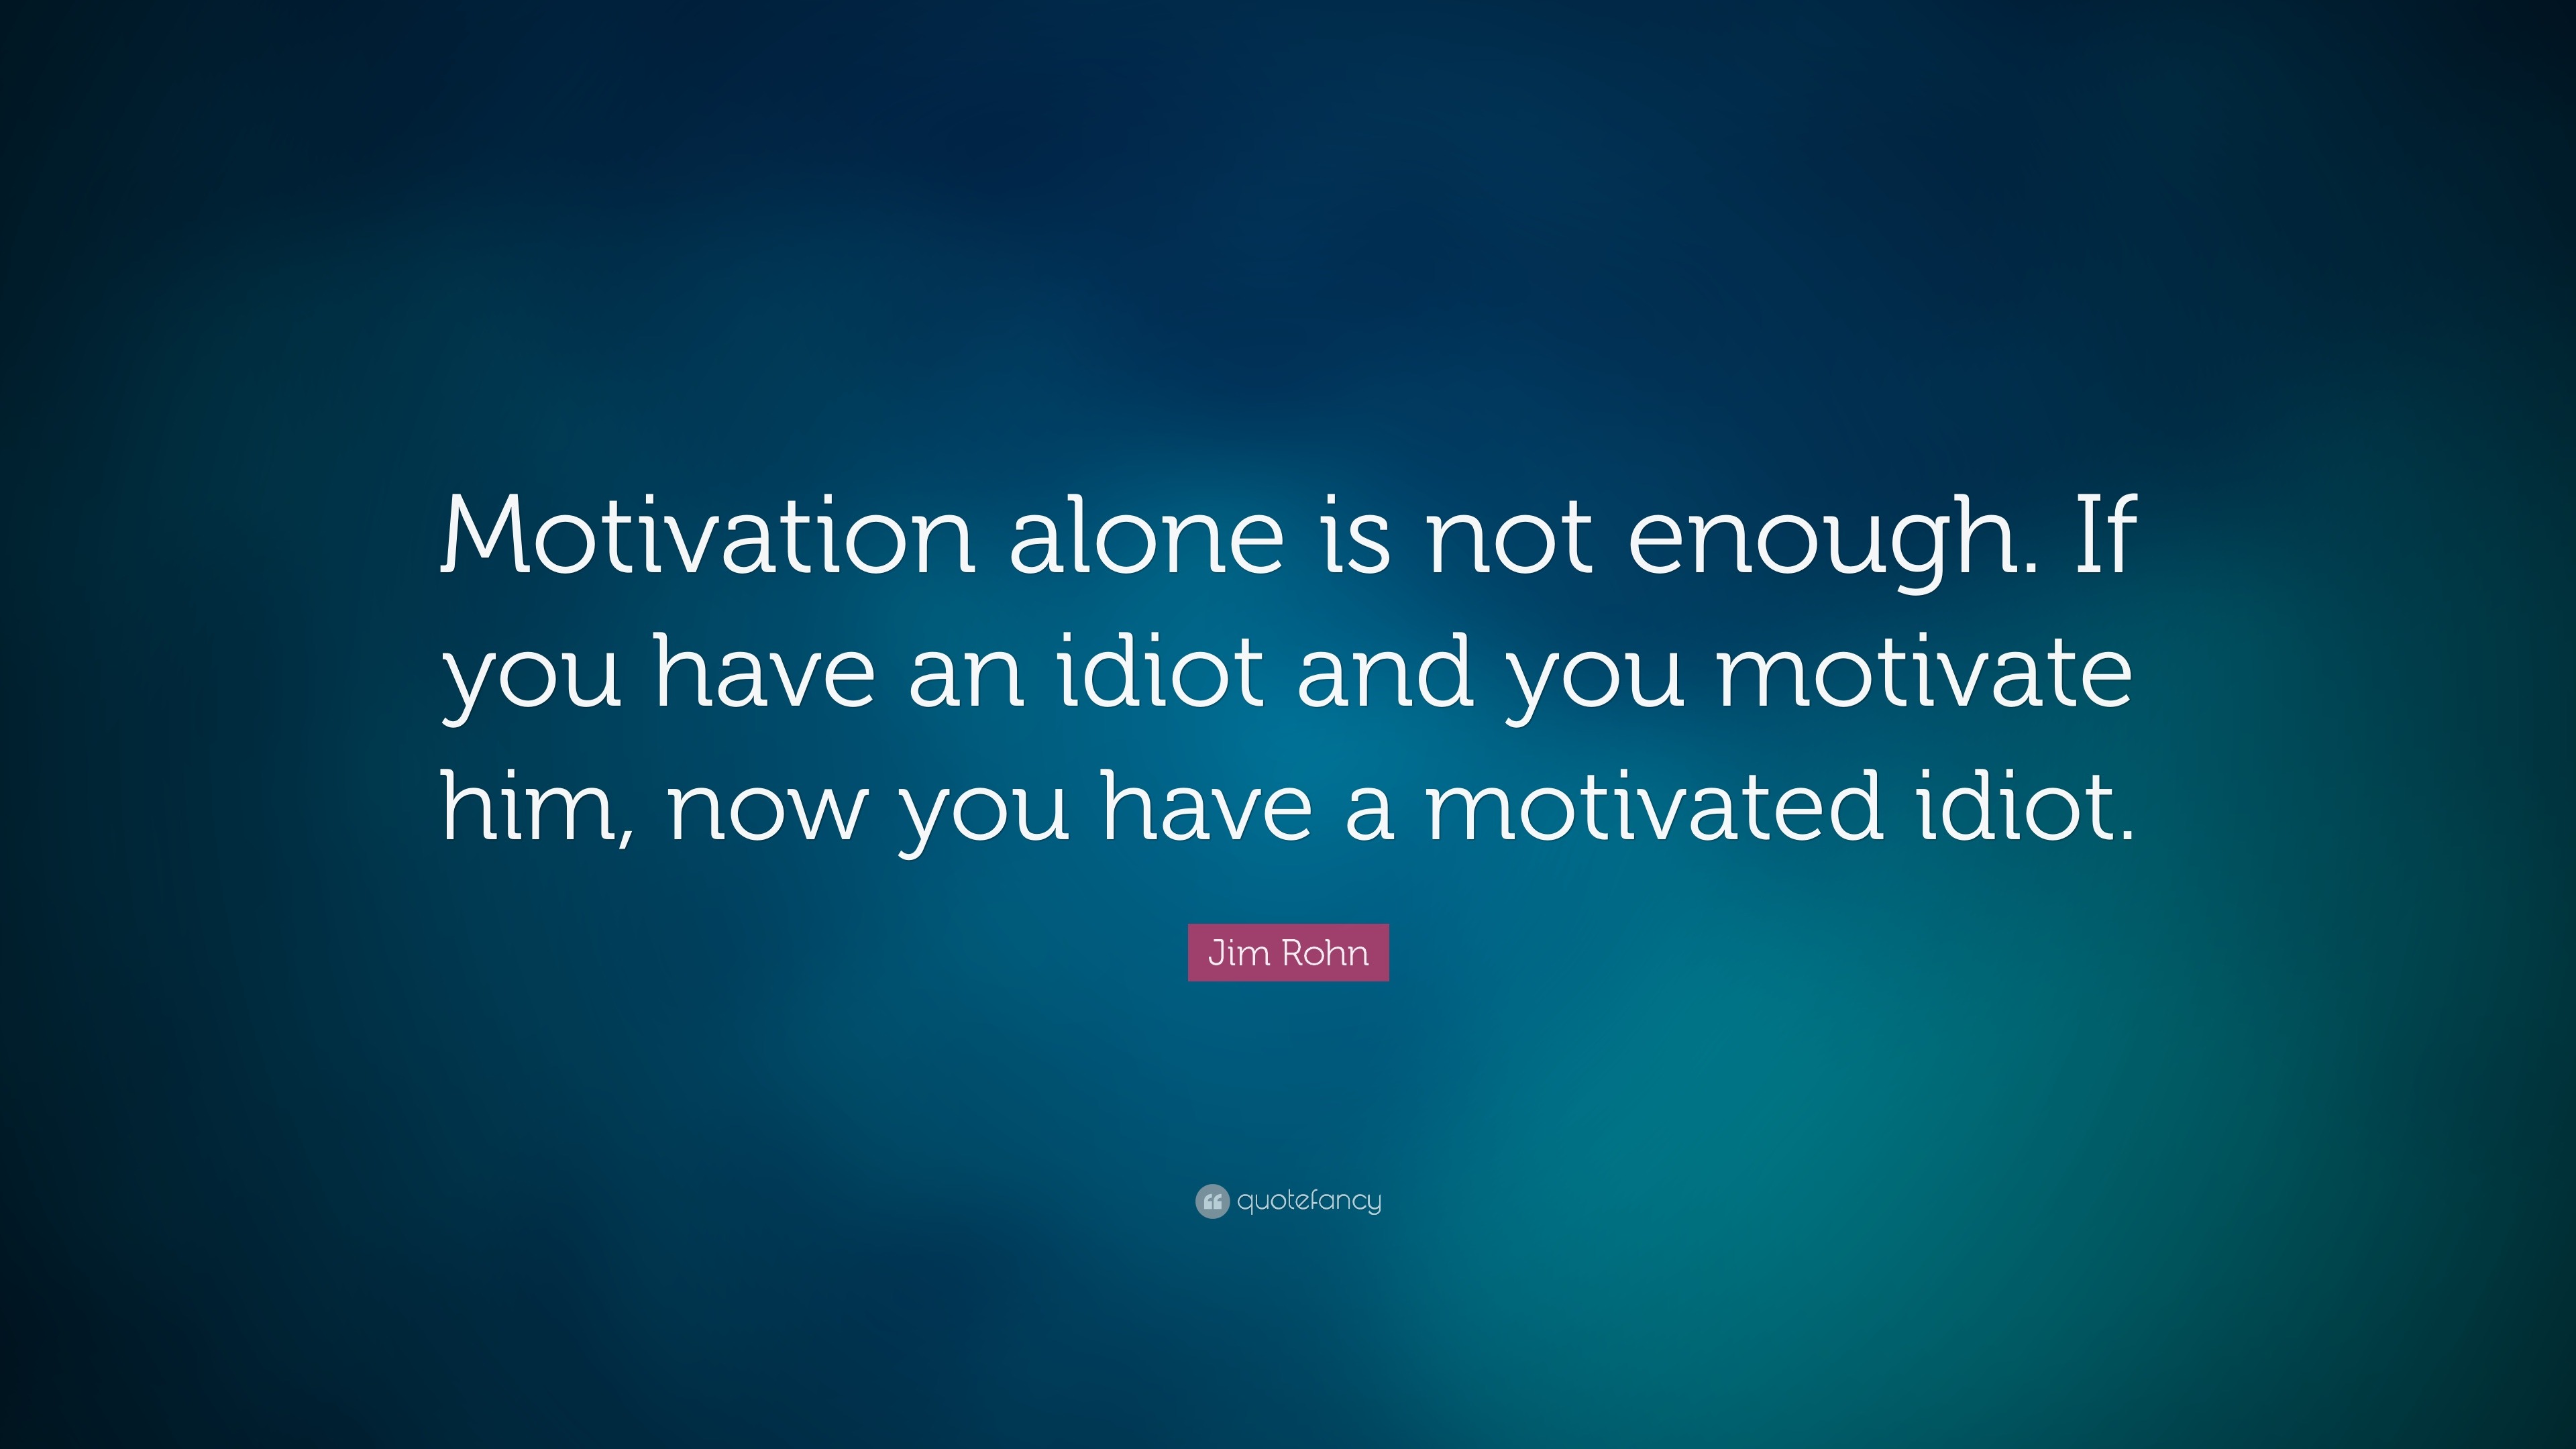 Jim Rohn Quote: “Motivation alone is not enough. If you have an idiot